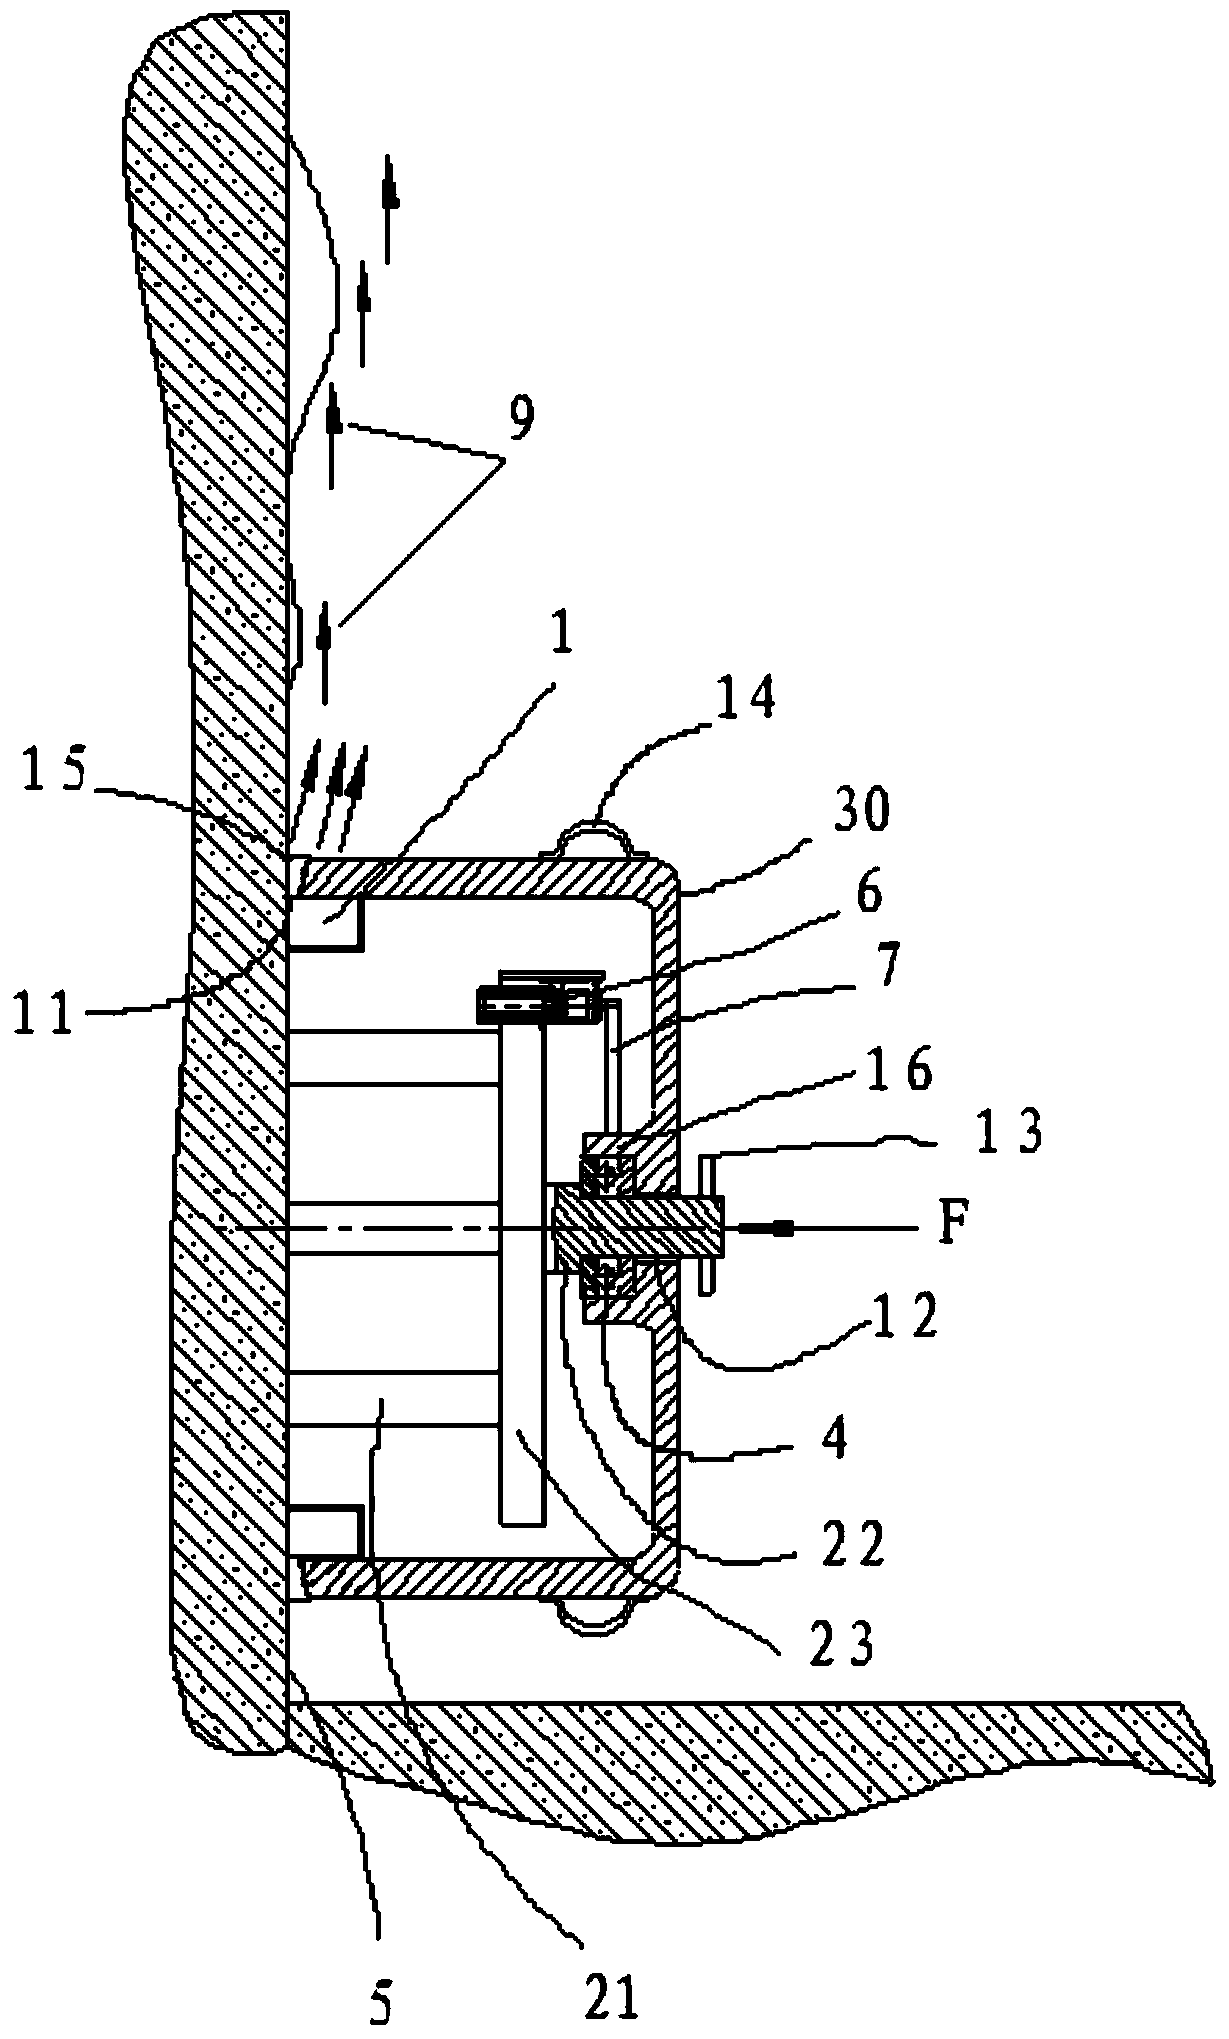 Device for measuring wall or ground flatness by lasers